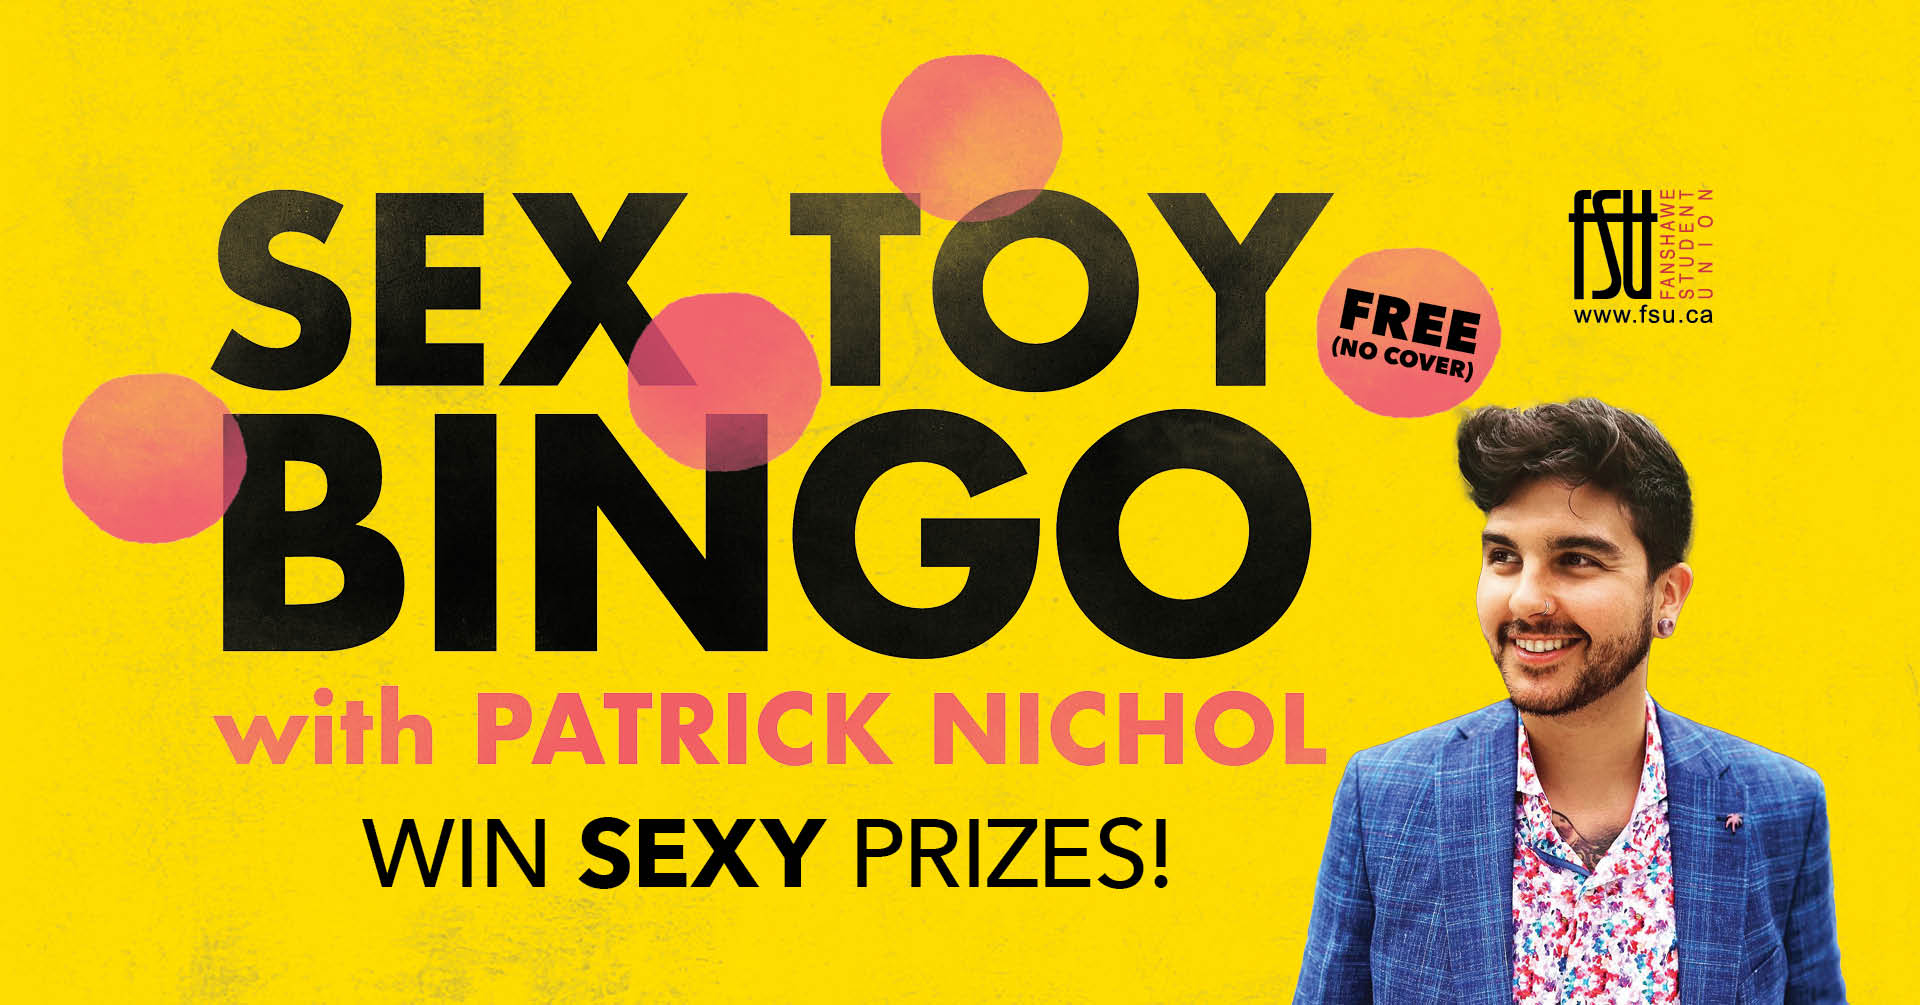 Photo of Patrick Nichol. An illustration of a bingo card. Text states: Sex Toy Bingo with Patrick Nichol. WIN SEXY PRIZES! SOUTH CAMPUS THIRD FLOOR LOUNGE. Seating opens at 1:30 p.m. January 5. 1:00 p.m. FREE (NO COVER).